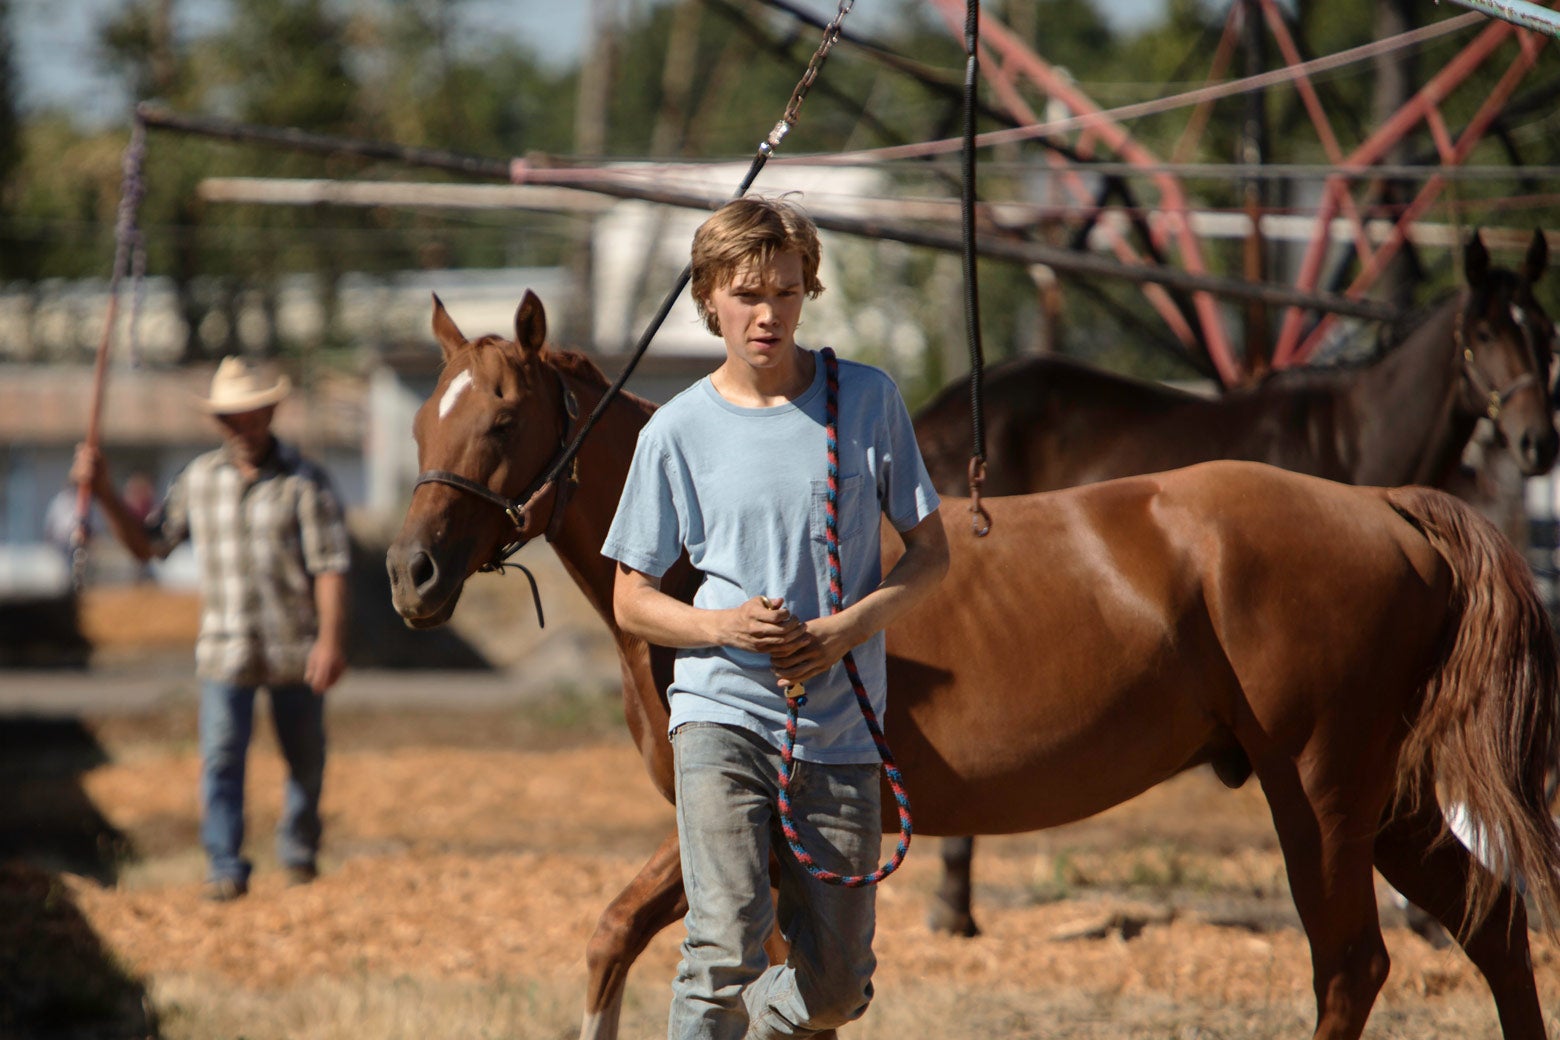 Charlie Plummer as Charley with his horse in Lean on Pete.